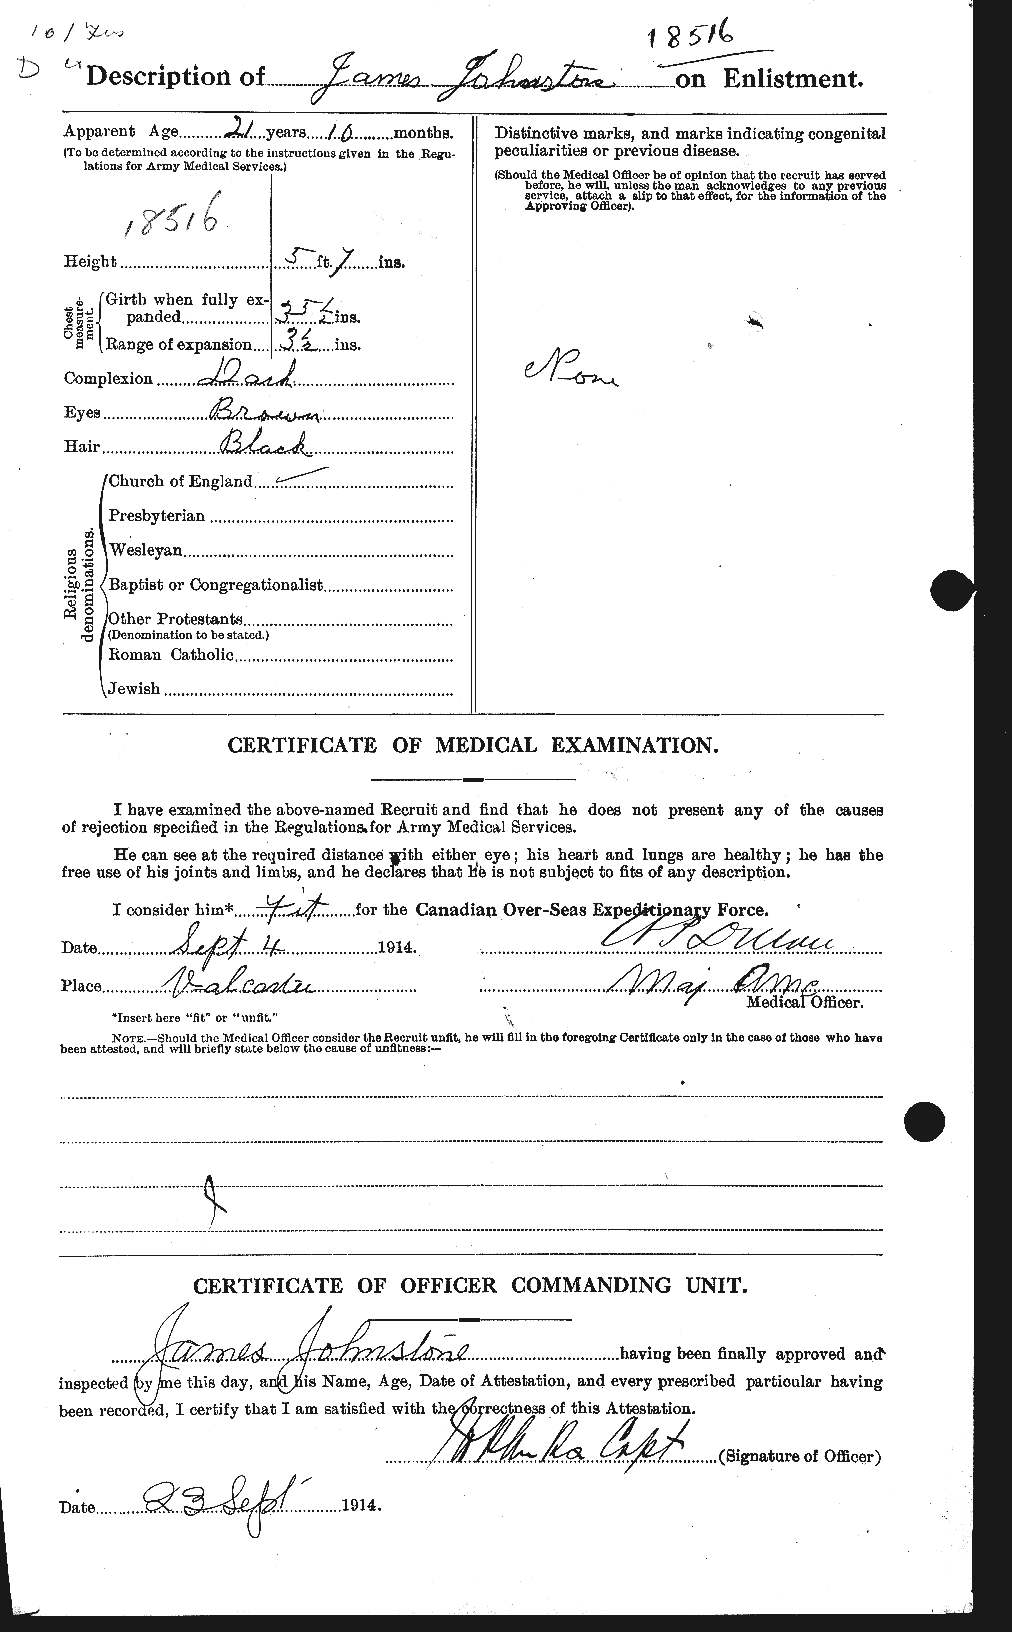 Personnel Records of the First World War - CEF 419630b